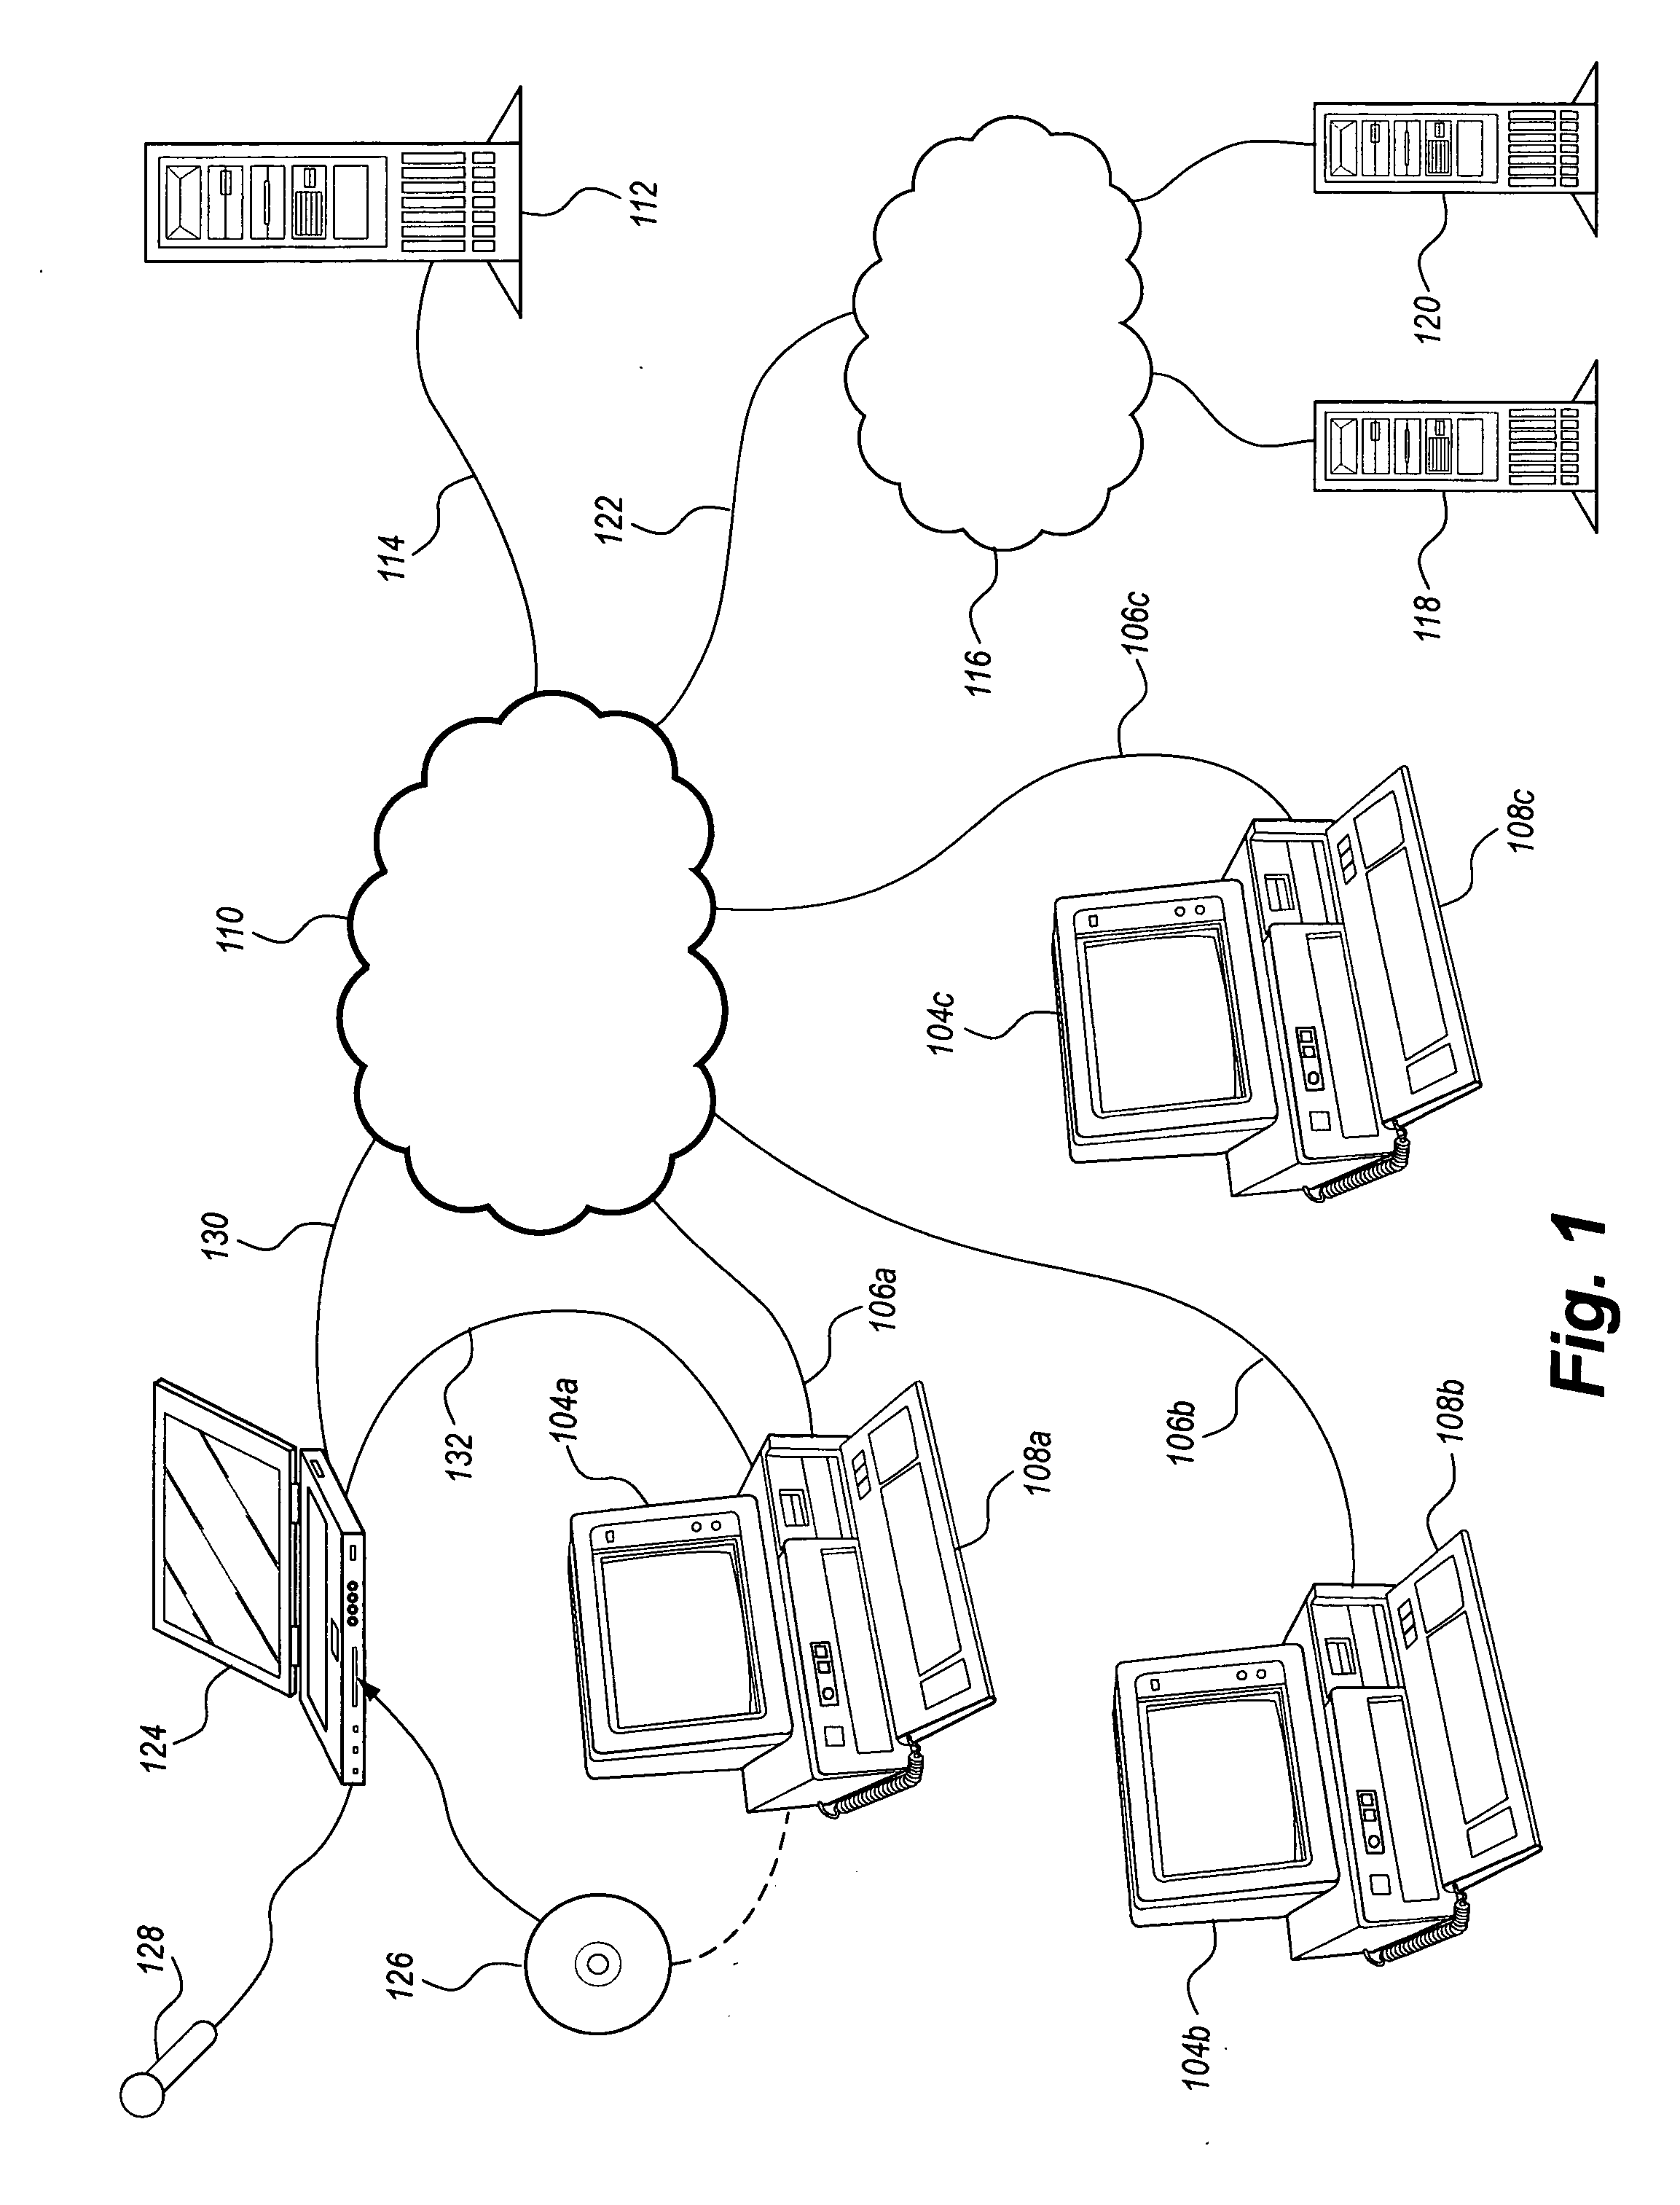 Psycho/physiological deception detection system and method for controlled substance surveillance